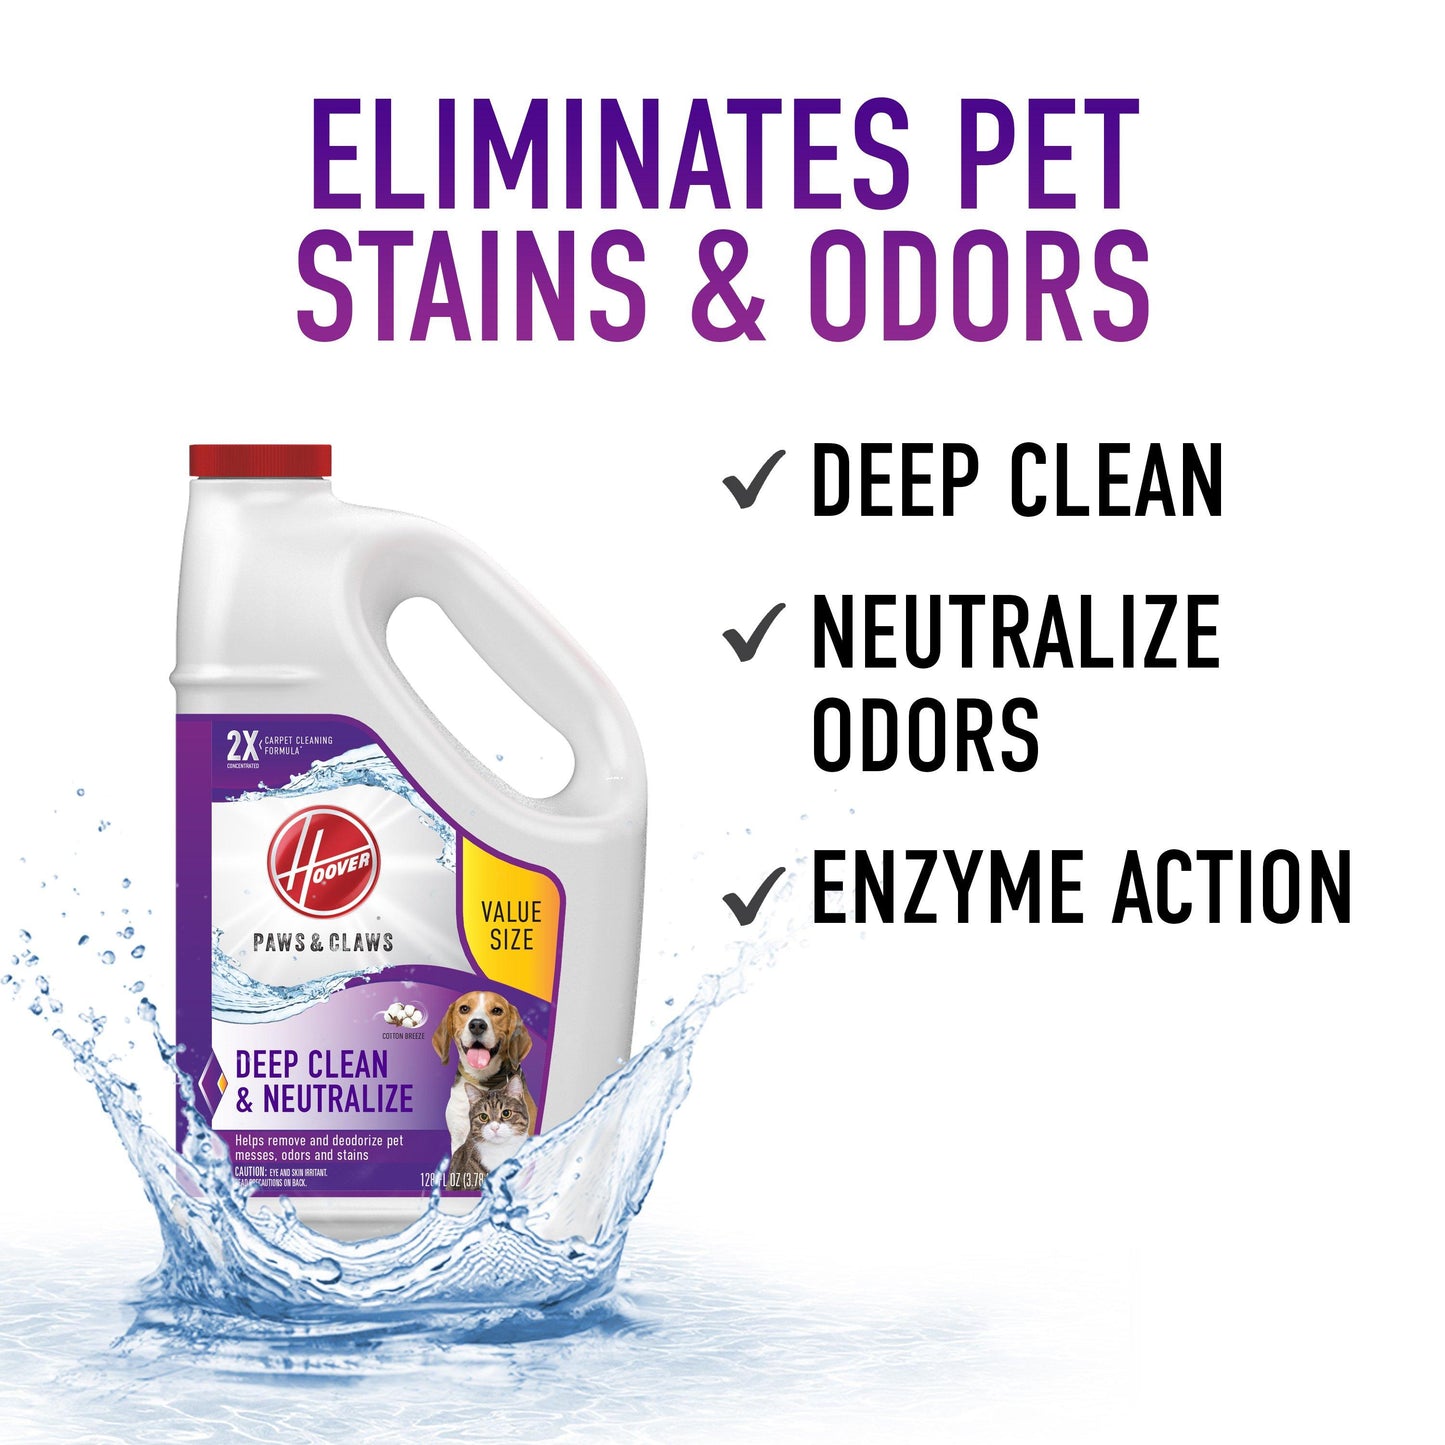 Hoover Paws & Claws Carpet Cleaning Formula 128 oz.